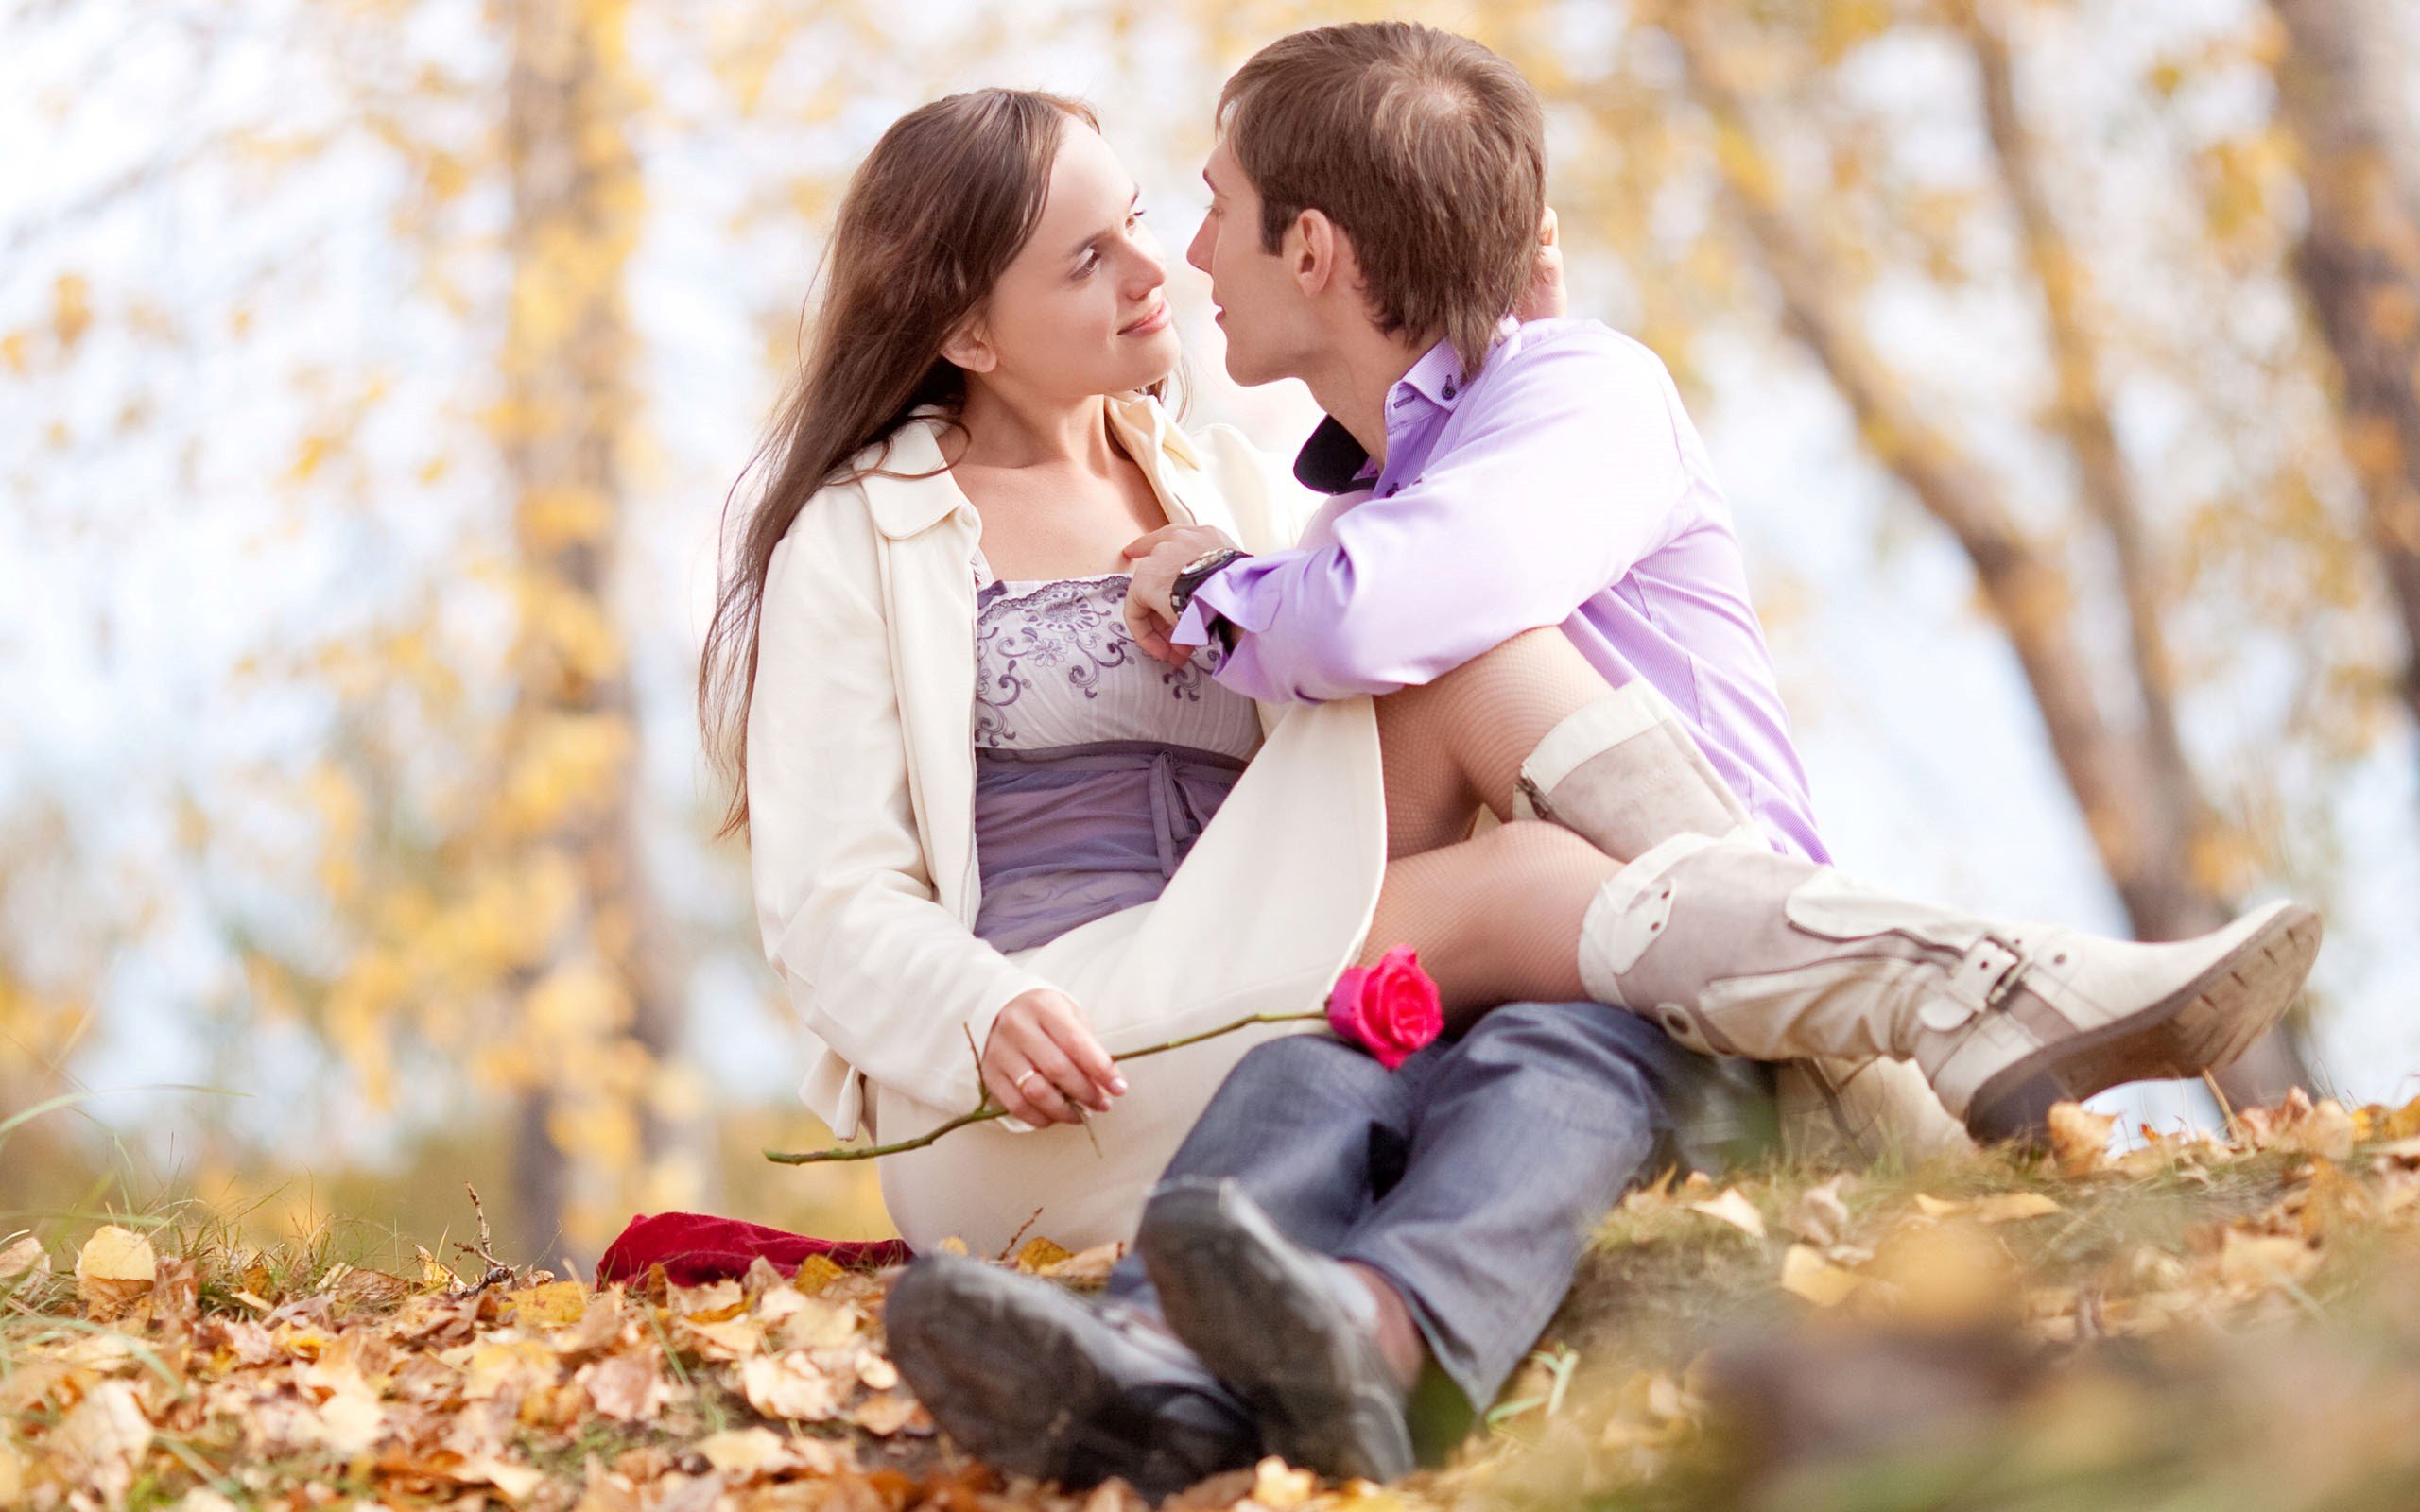 Download Free Romantic Love Couple Wallpapers 2015 hd Images Pics